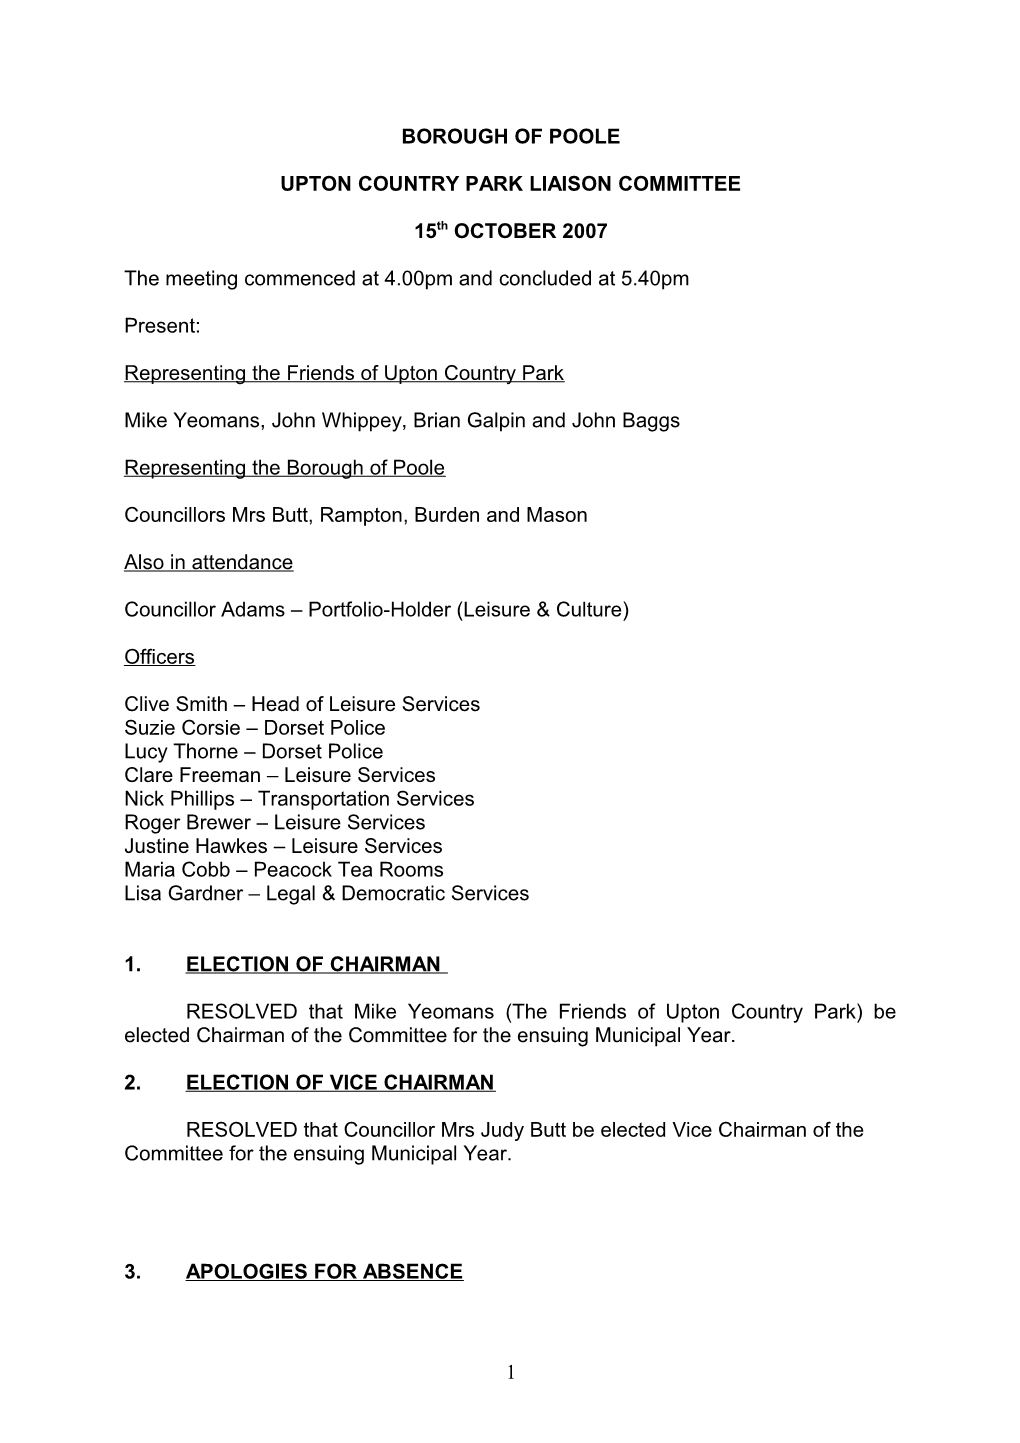 Minutes - Upton Country Park Liaison Committee - 15 October 2007